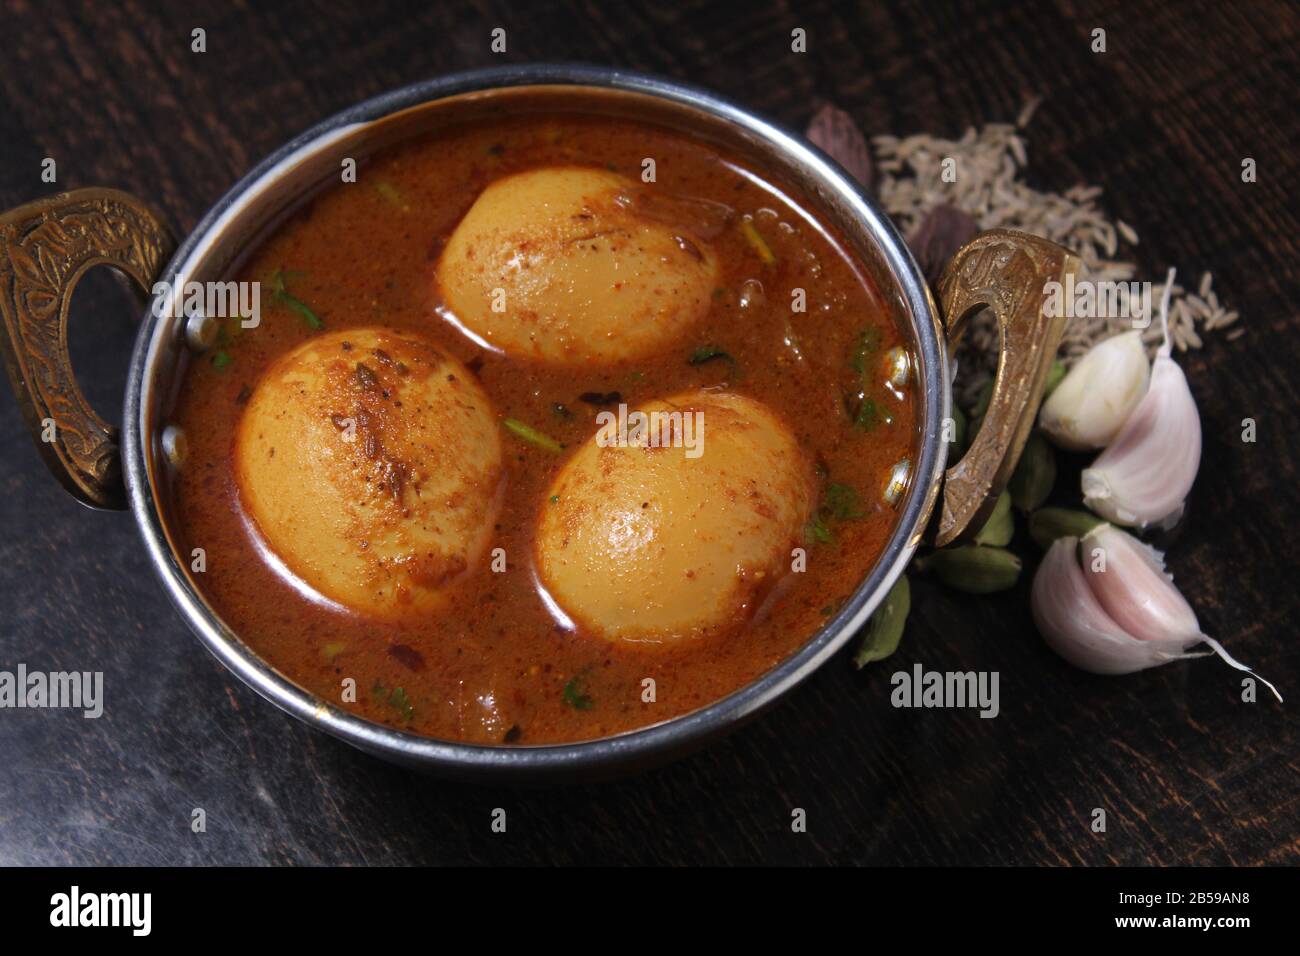 South Indian Style Egg Curry Recipe close-up on the table nobody Stock Photo